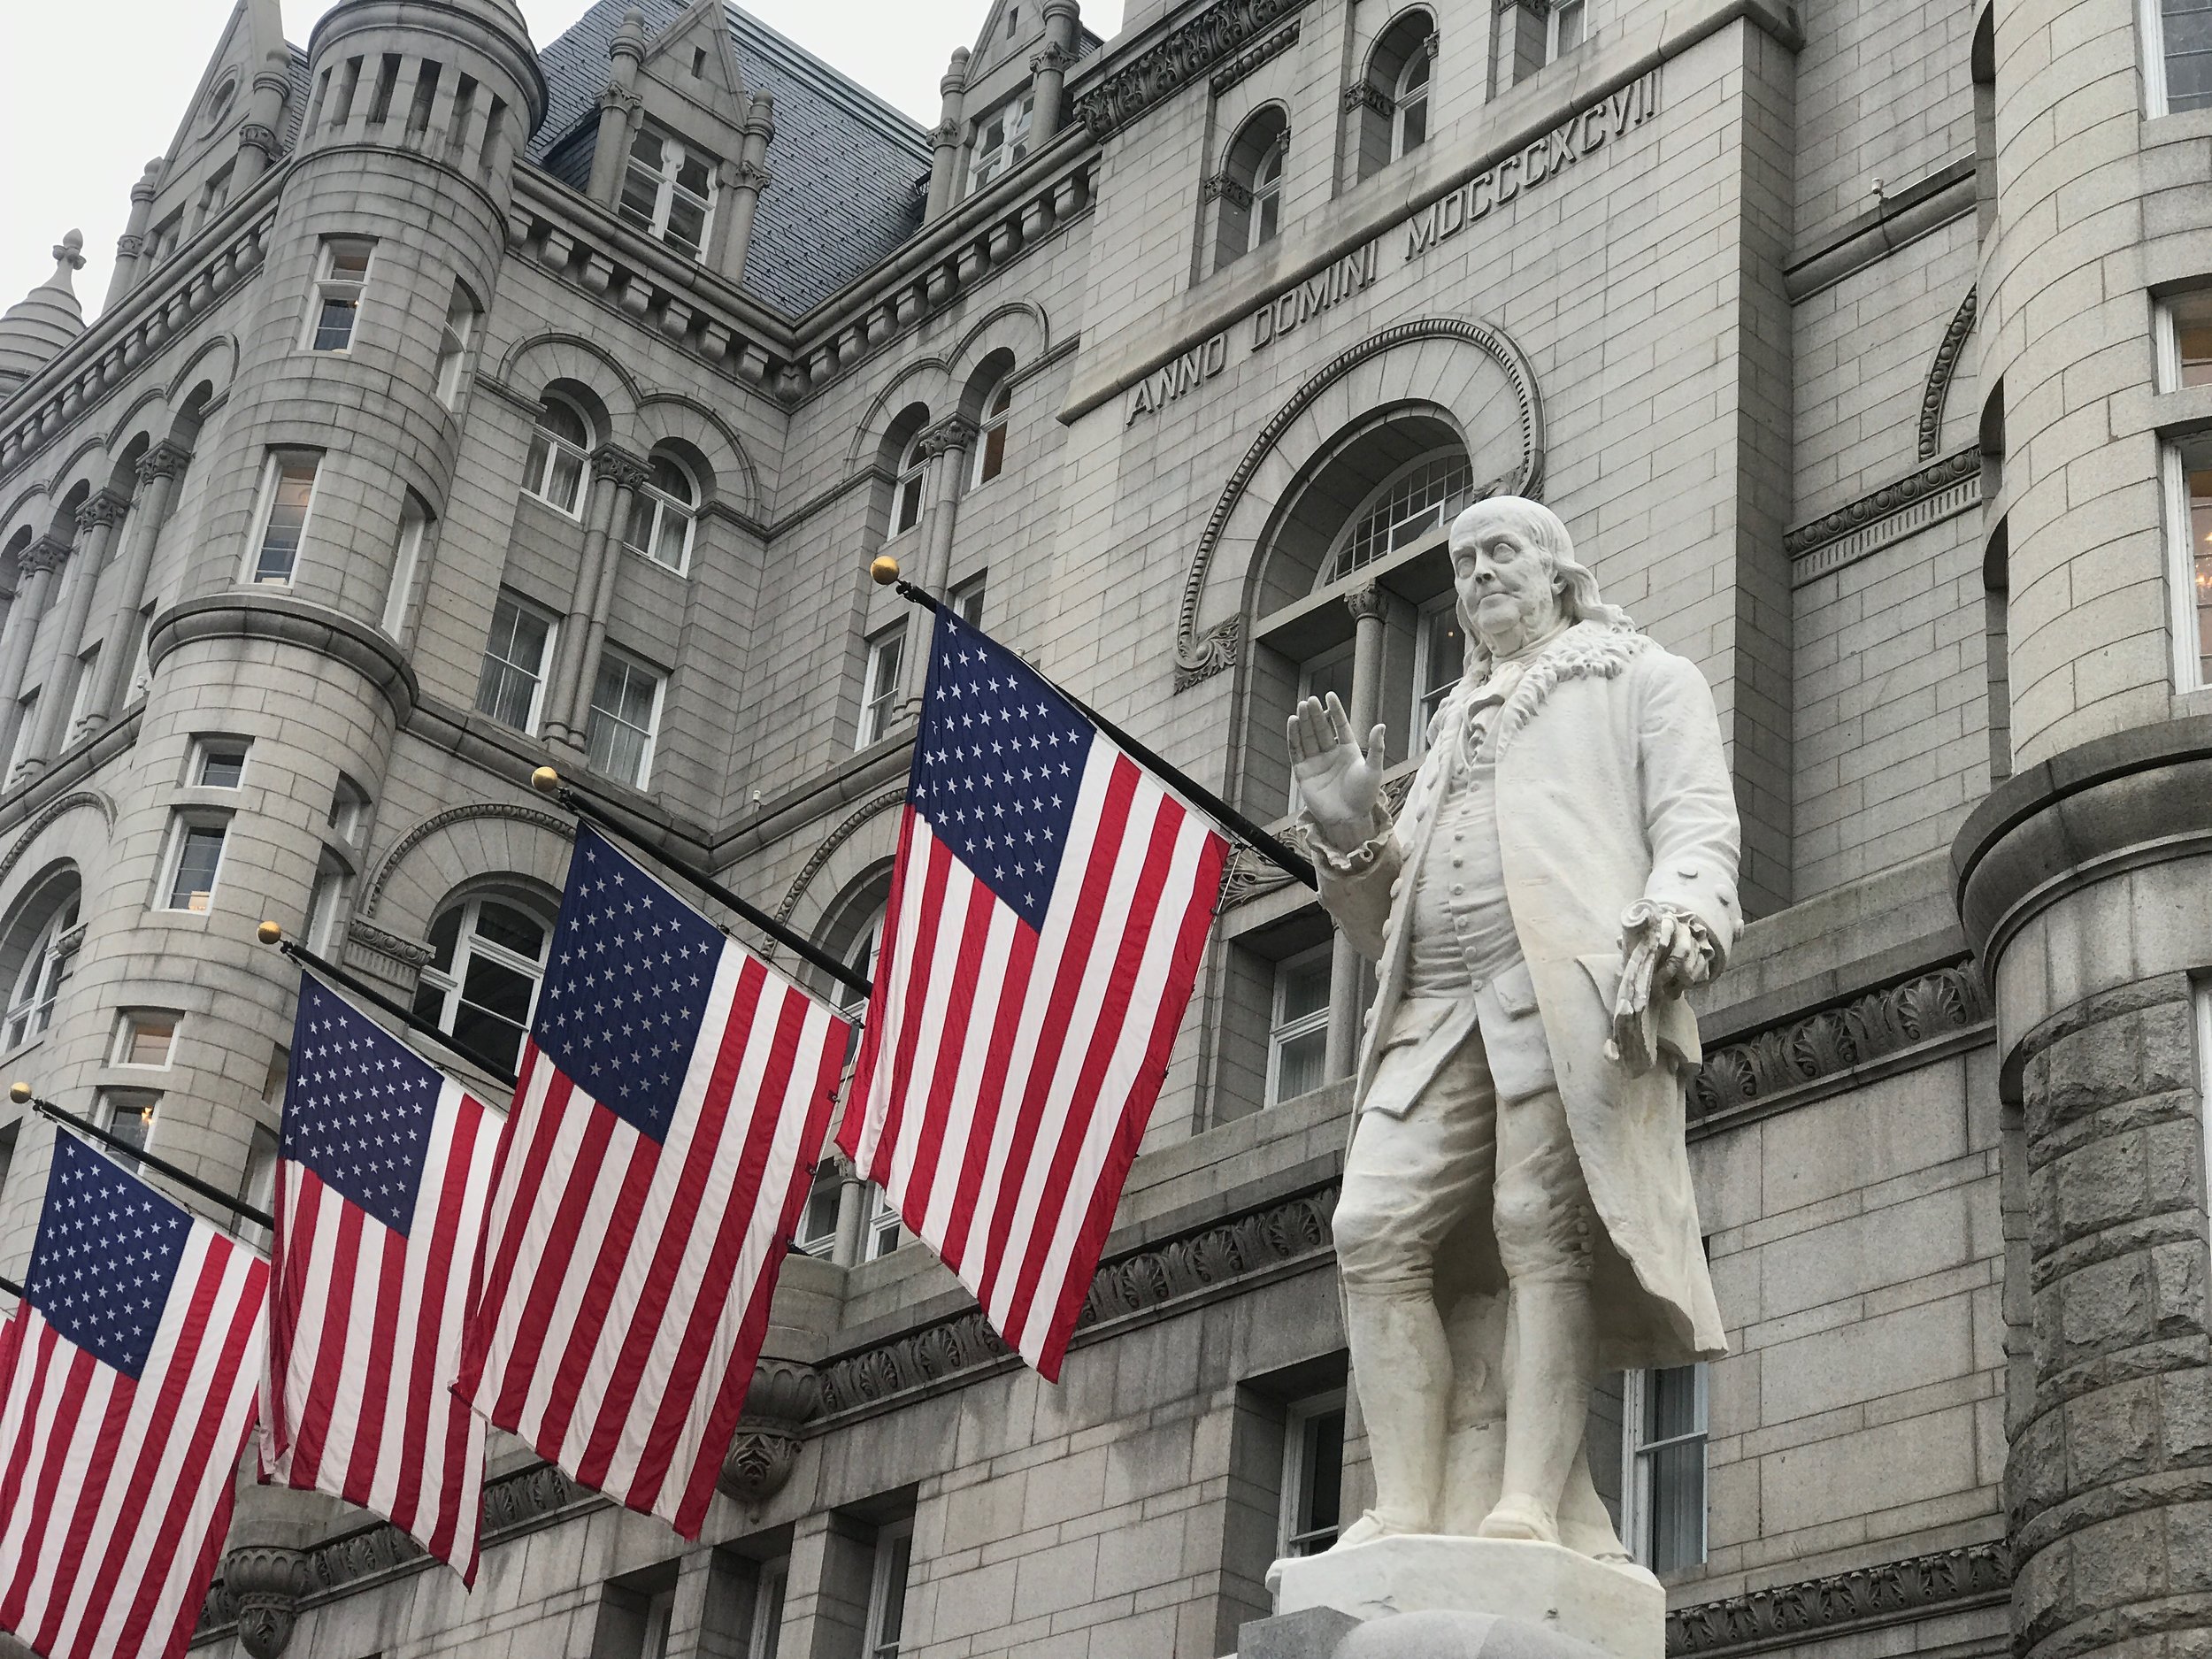  A statue of Benjamin Franklin, who served as the nation’s first postmaster general, stands outside the former Post Office Building in Washington, which is now home of the Trump International Hotel.      